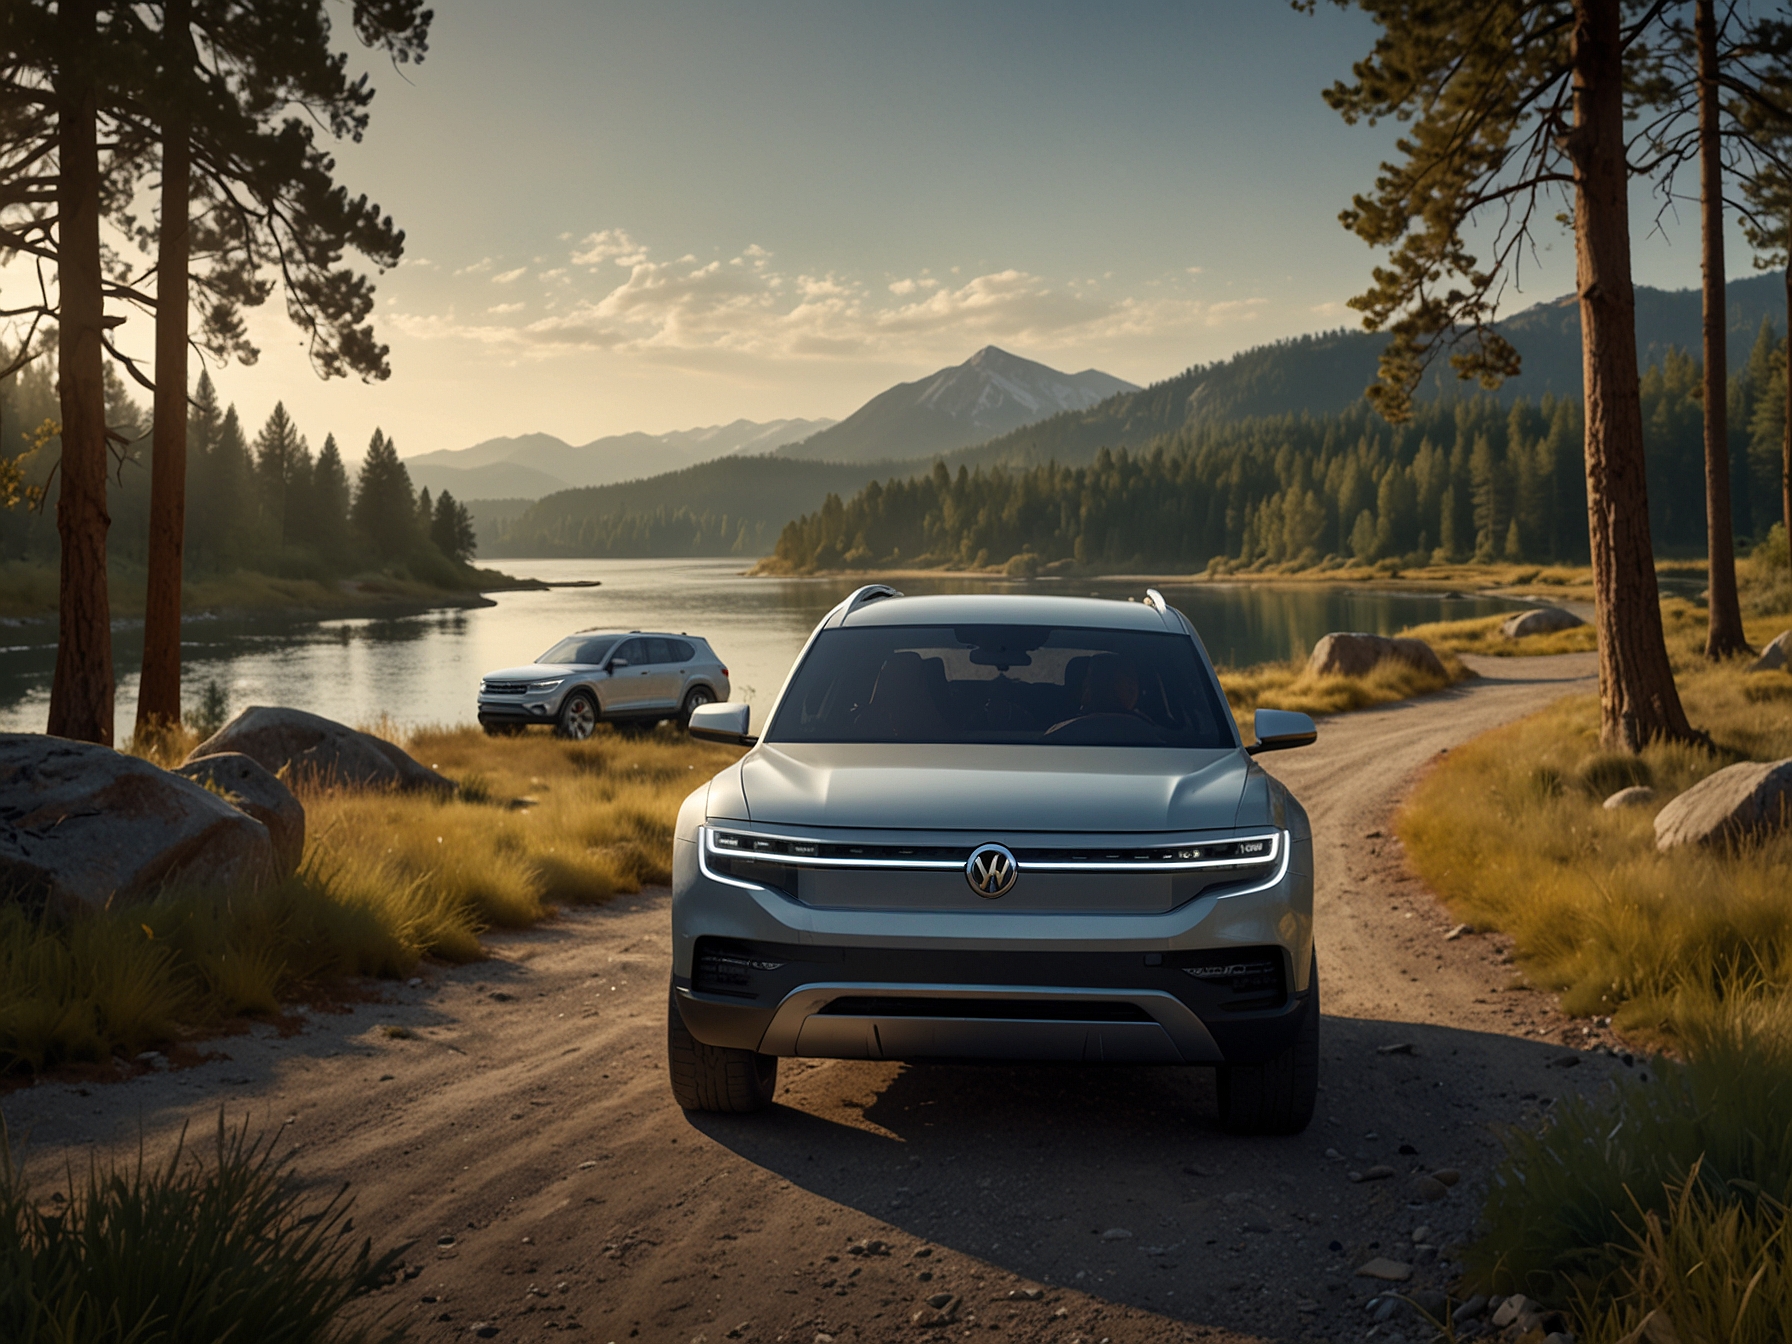 Electric Rivian R1T pickup truck and R1S SUV in a scenic outdoor setting, highlighting the innovative electric vehicles that have caught Volkswagen's attention for investment.